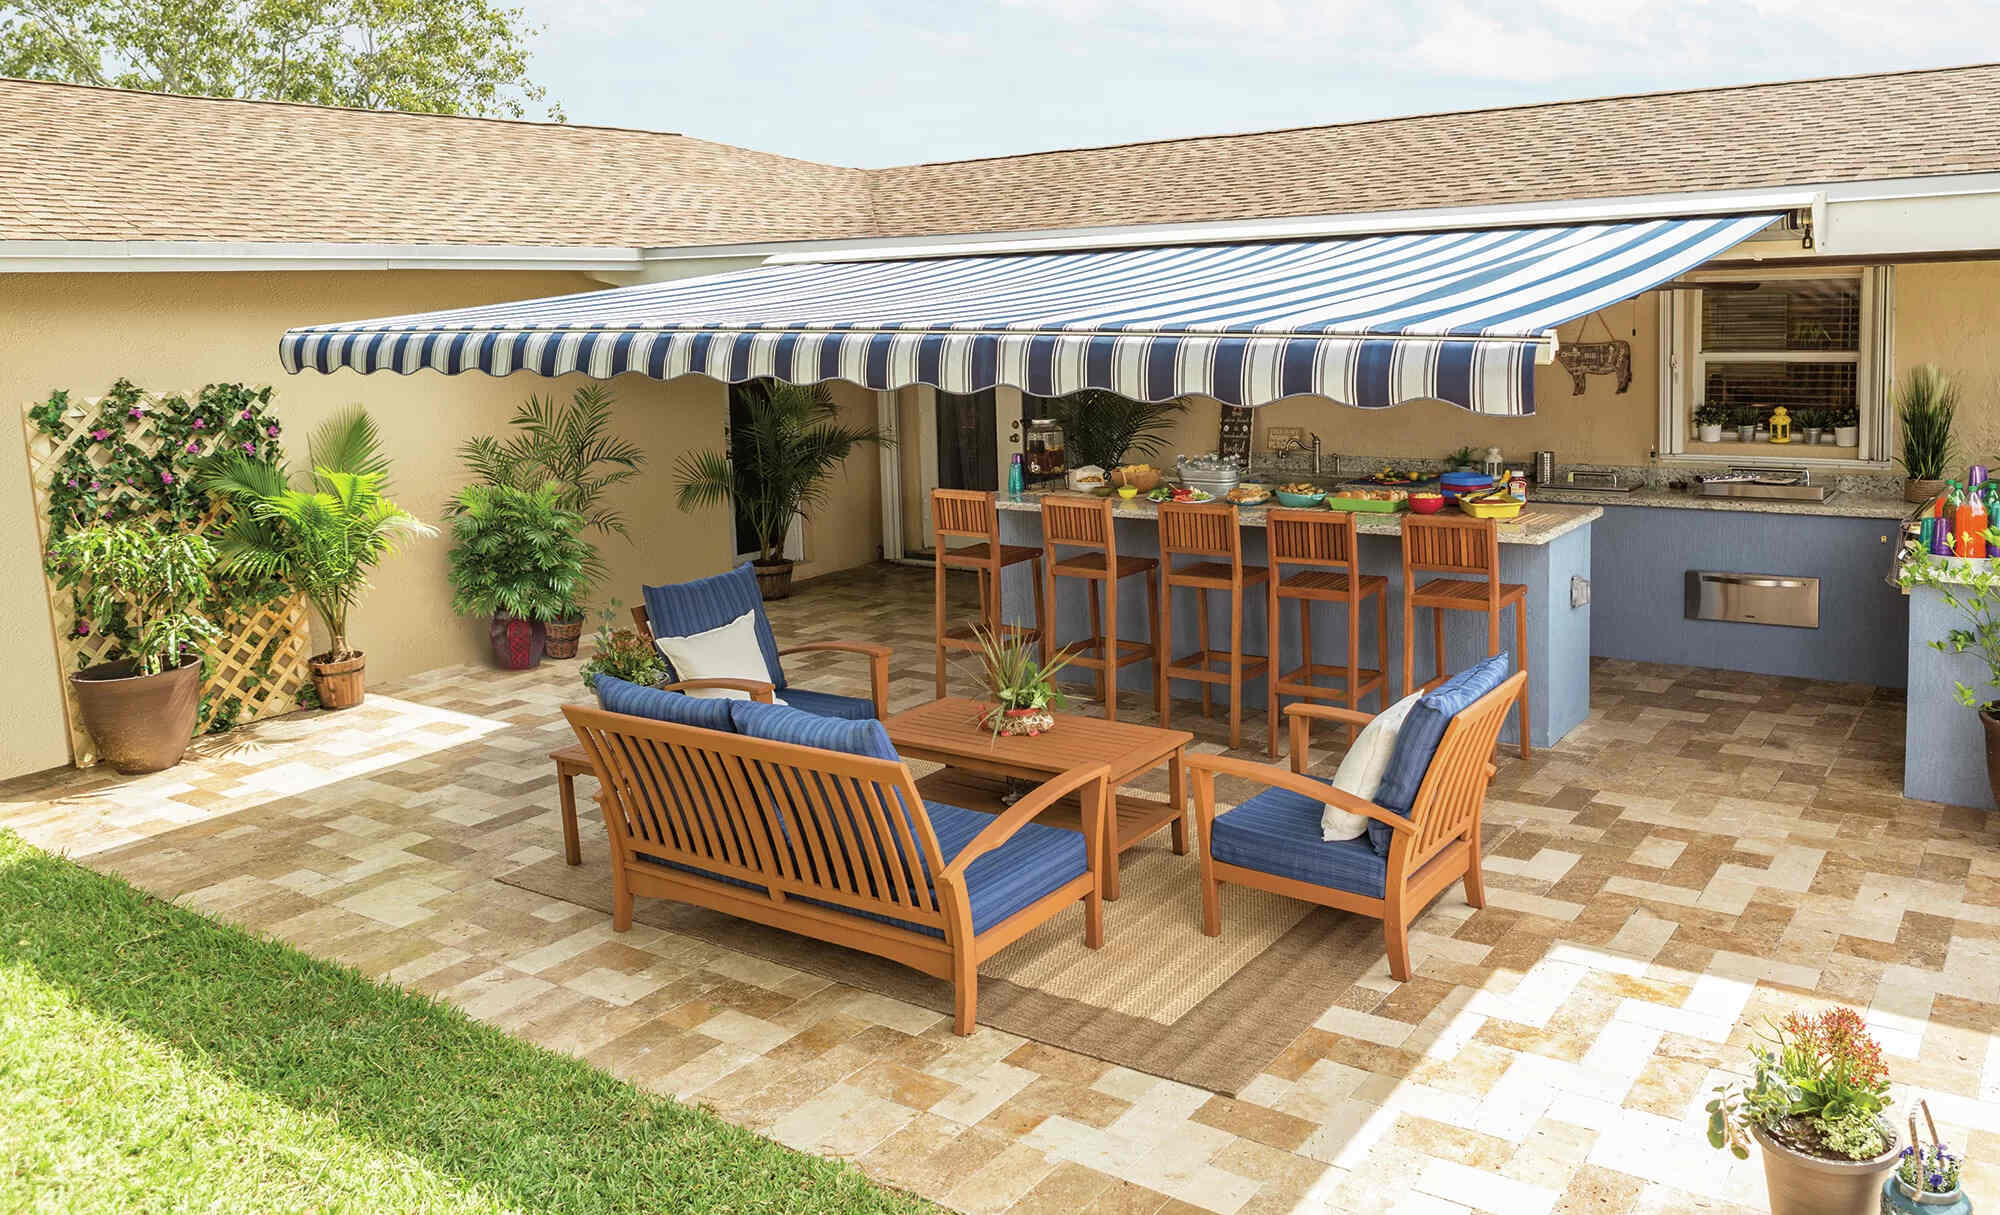 How To Install A Sunsetter Awning